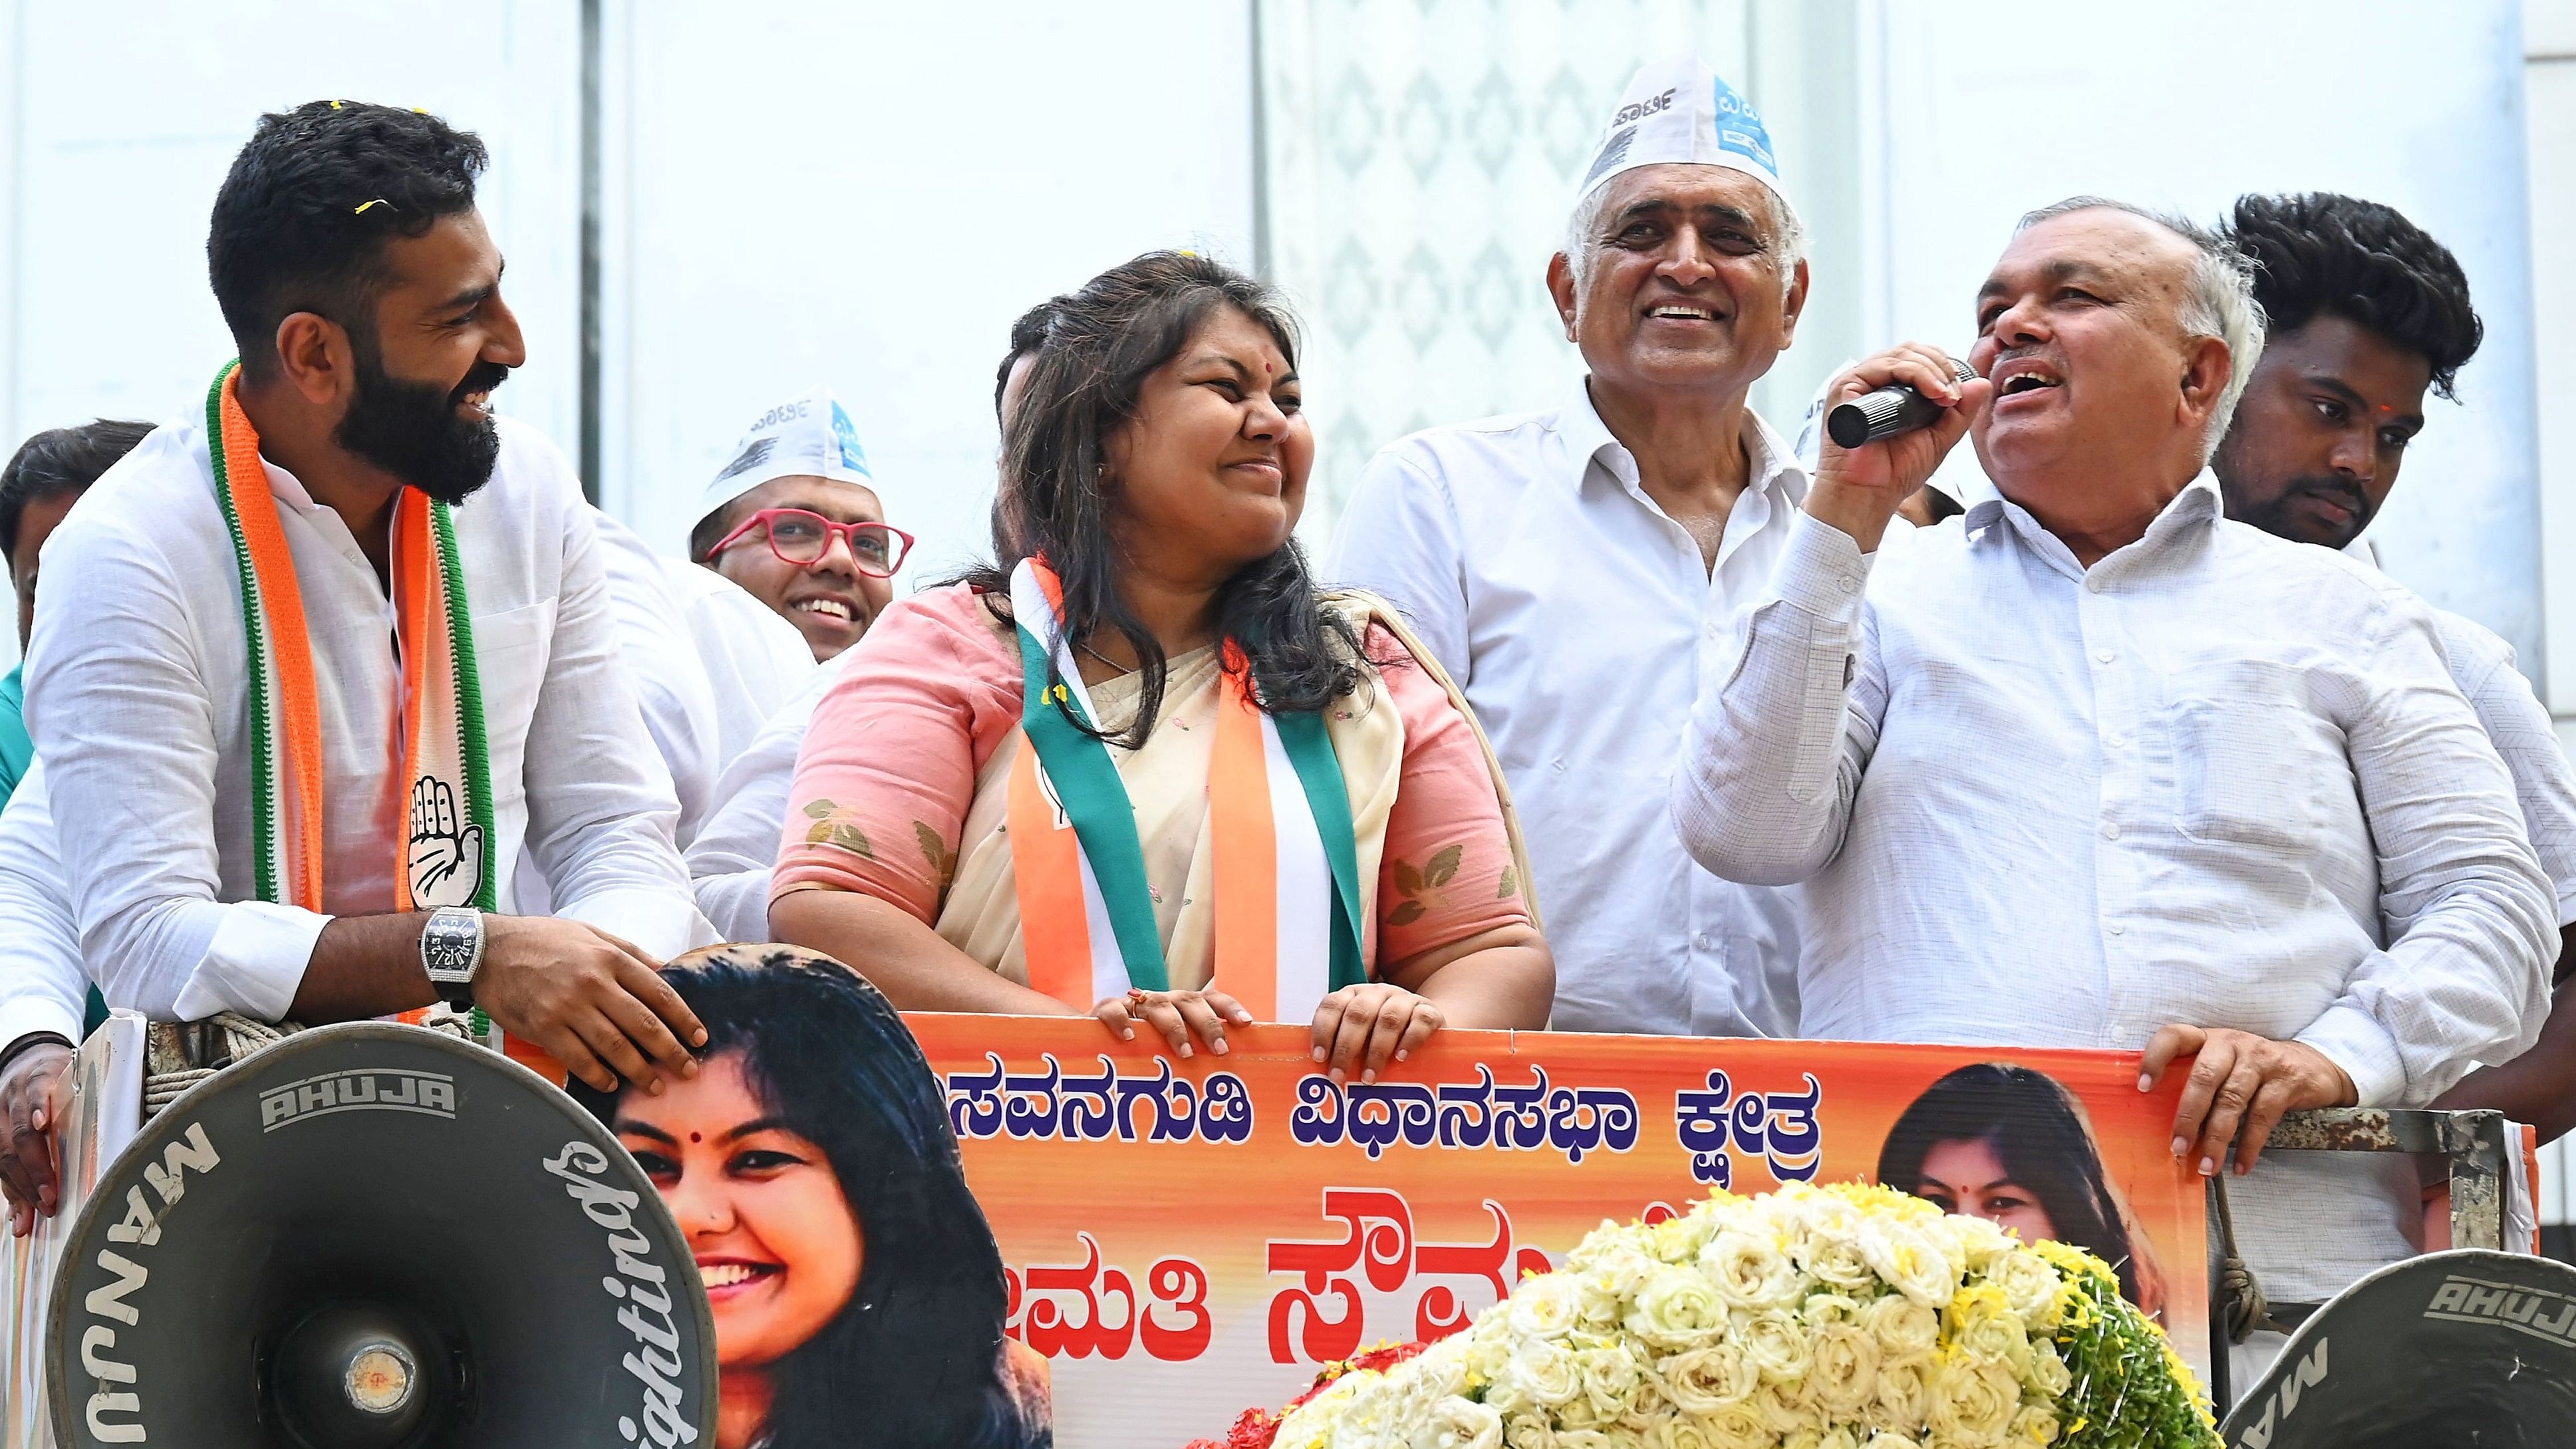 <div class="paragraphs"><p>Sowmya Reddy, alongside her father Ramalinga Reddy, forges her own path in politics by championing women's empowerment.</p></div>